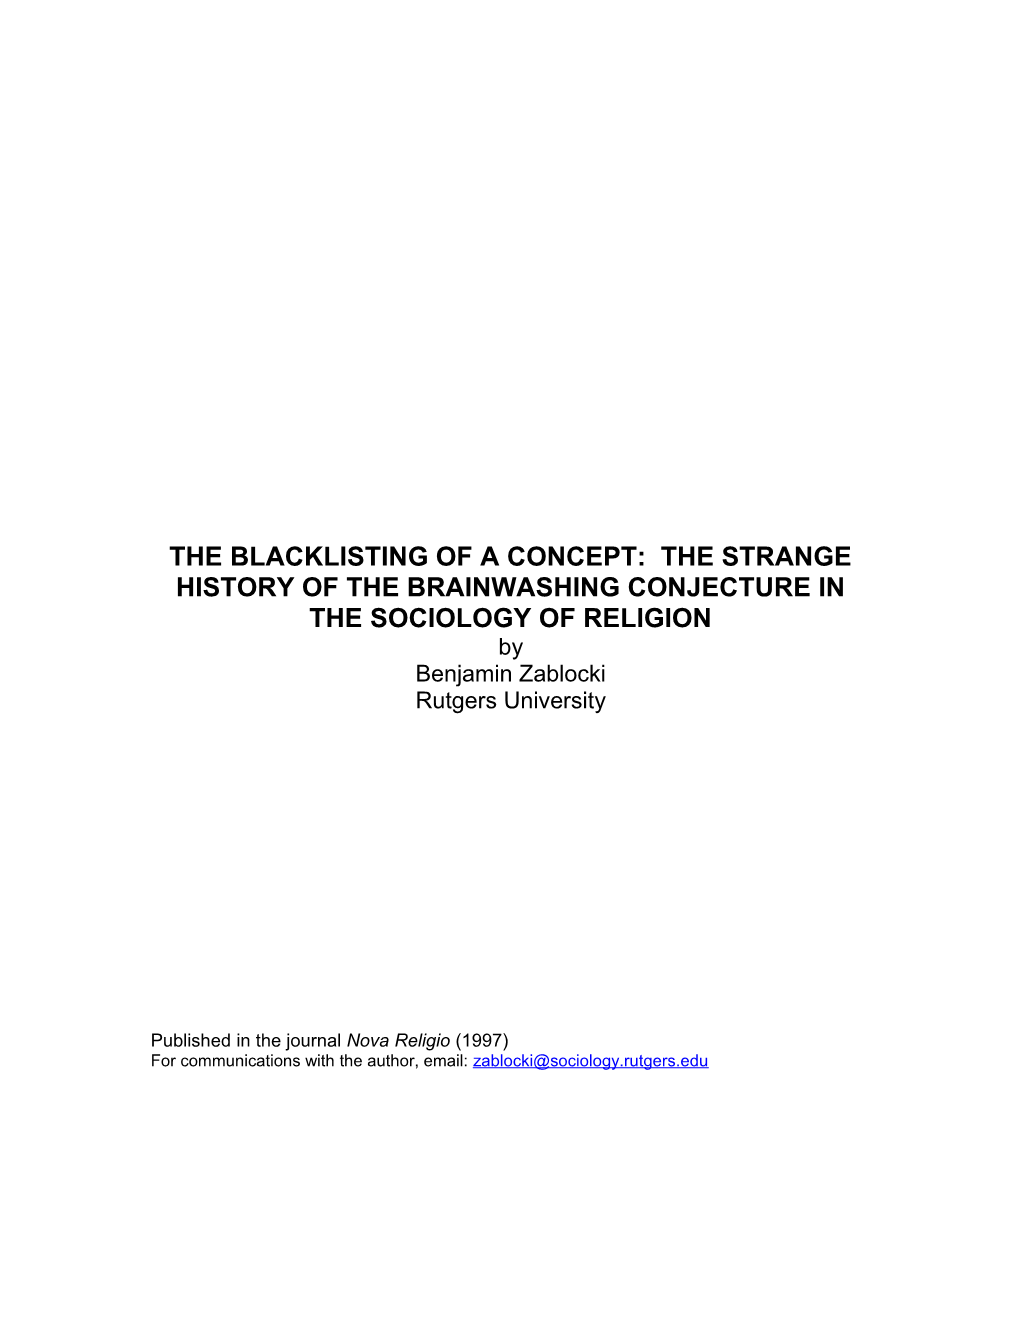 The Blacklisting of a Concept: the Strange History of the Brainwashing Conjecture in The